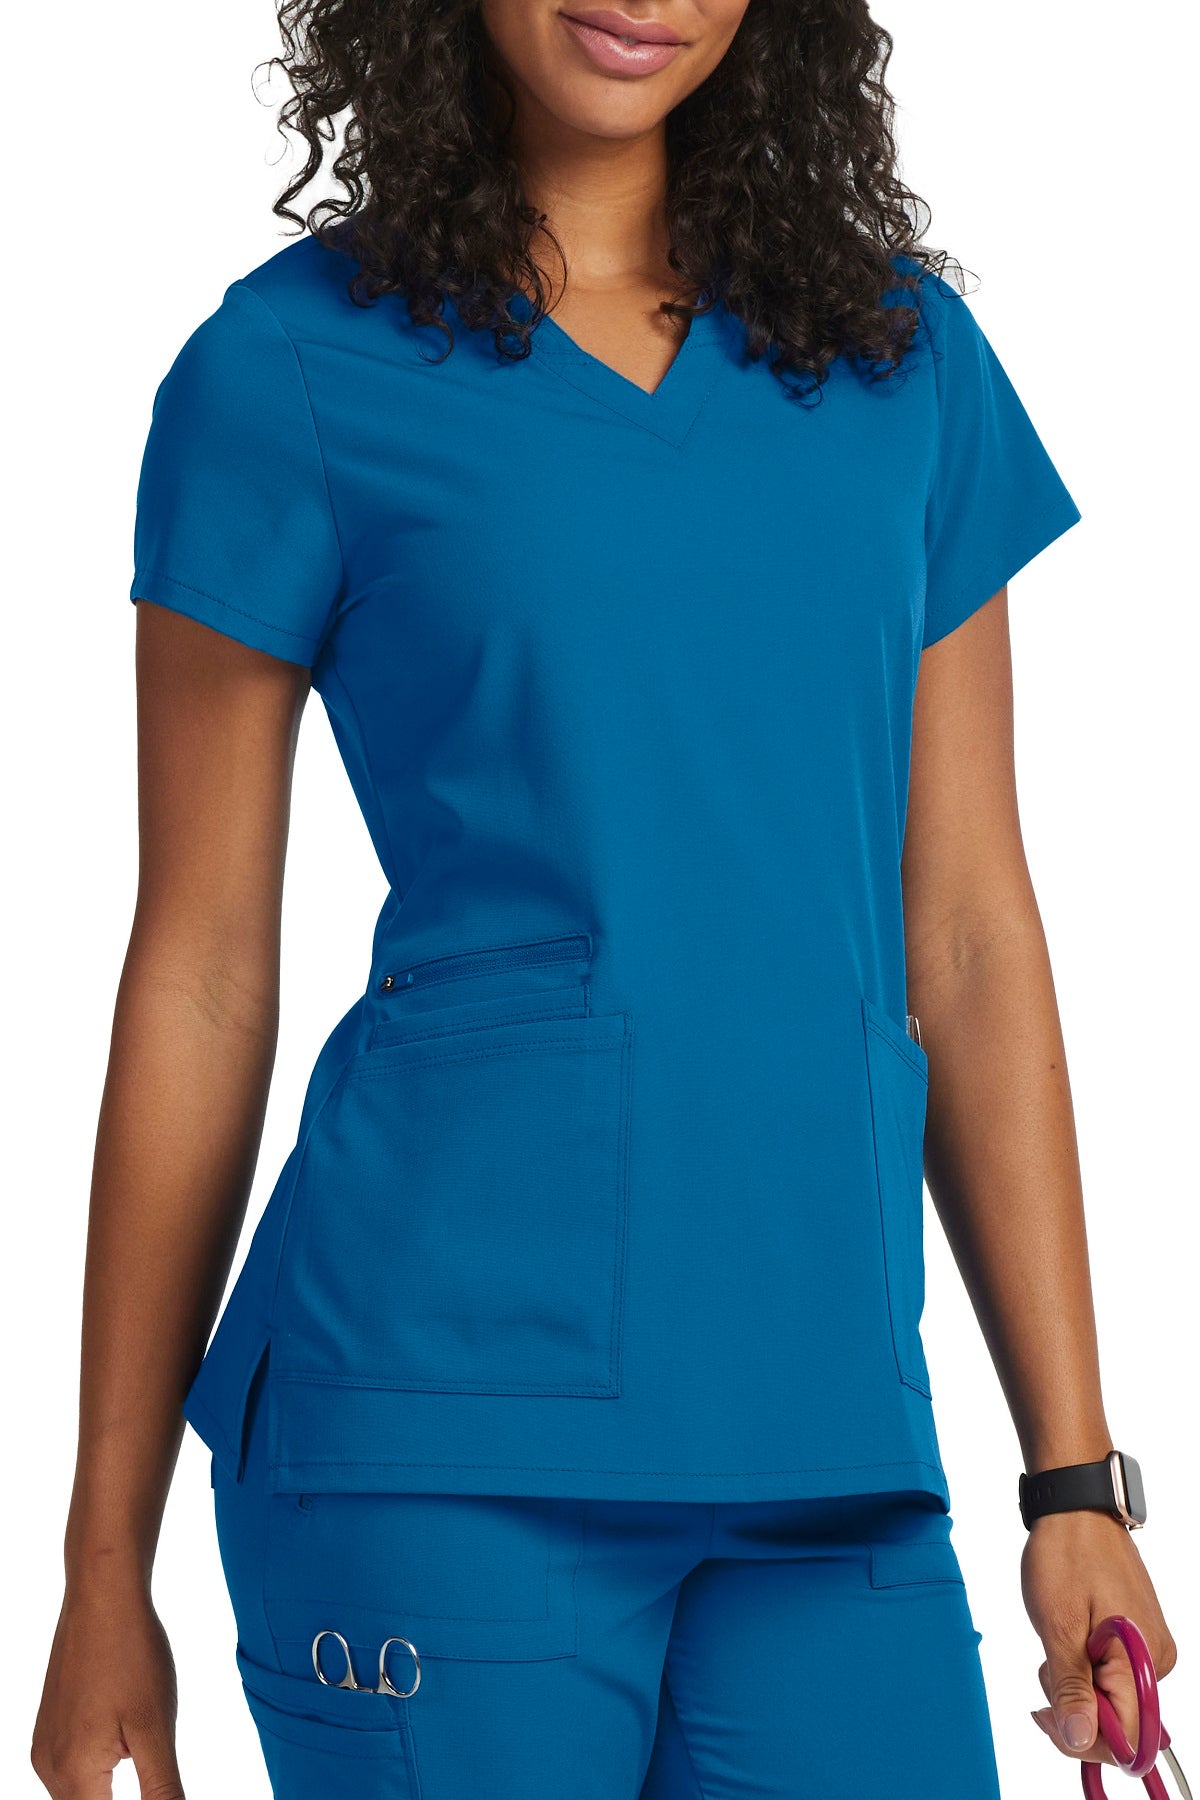 Barco Unify Scrub Top Purpose V-Neck in New Royal at Parker's Clothing and Shoes.